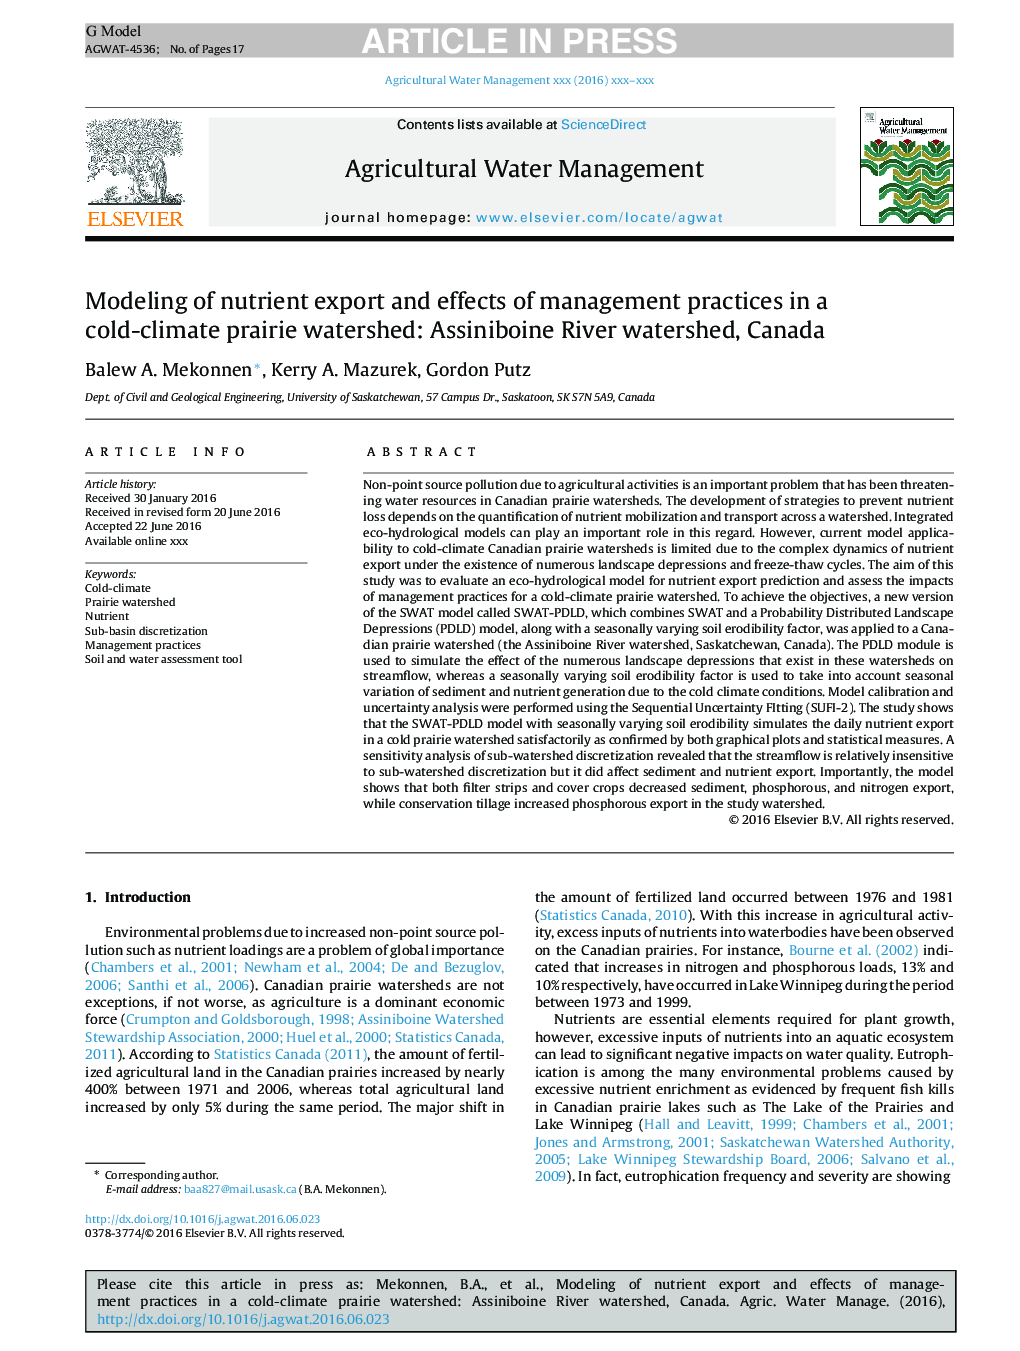 Modeling of nutrient export and effects of management practices in a cold-climate prairie watershed: Assiniboine River watershed, Canada